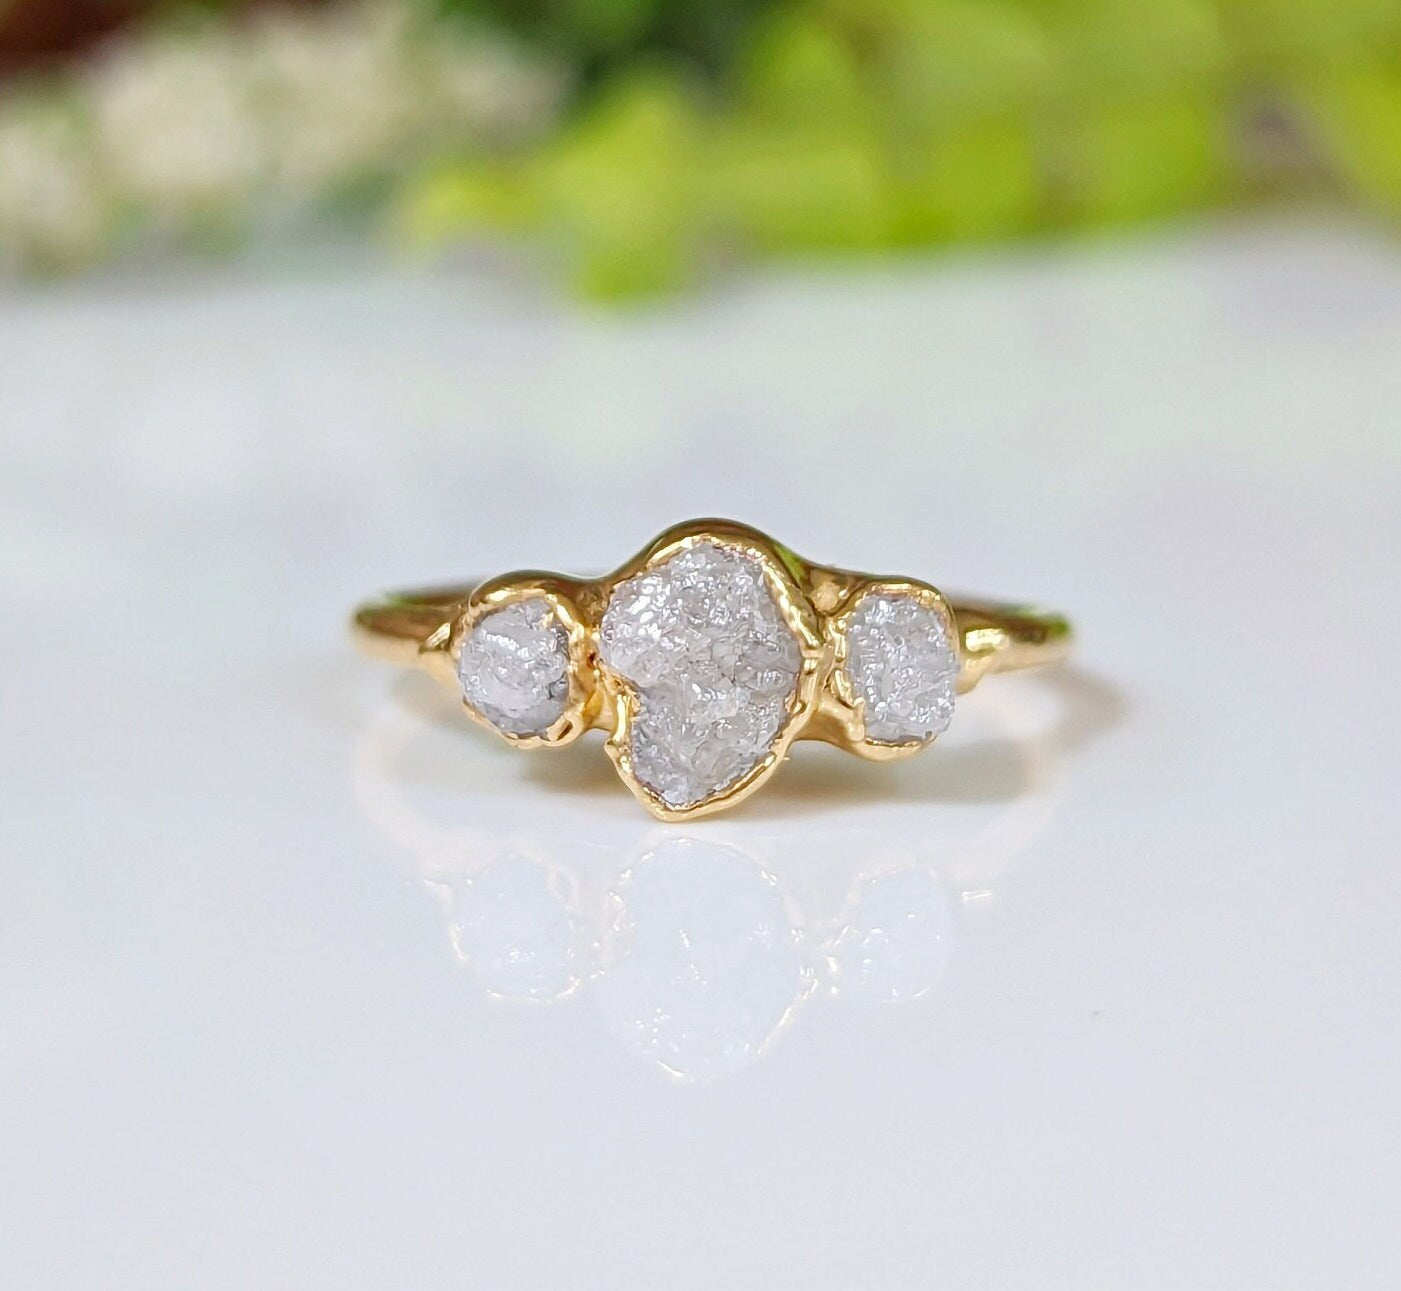 Unique Engagement Ring, 18K Gold Ring, Simple Diamond Ring, Made